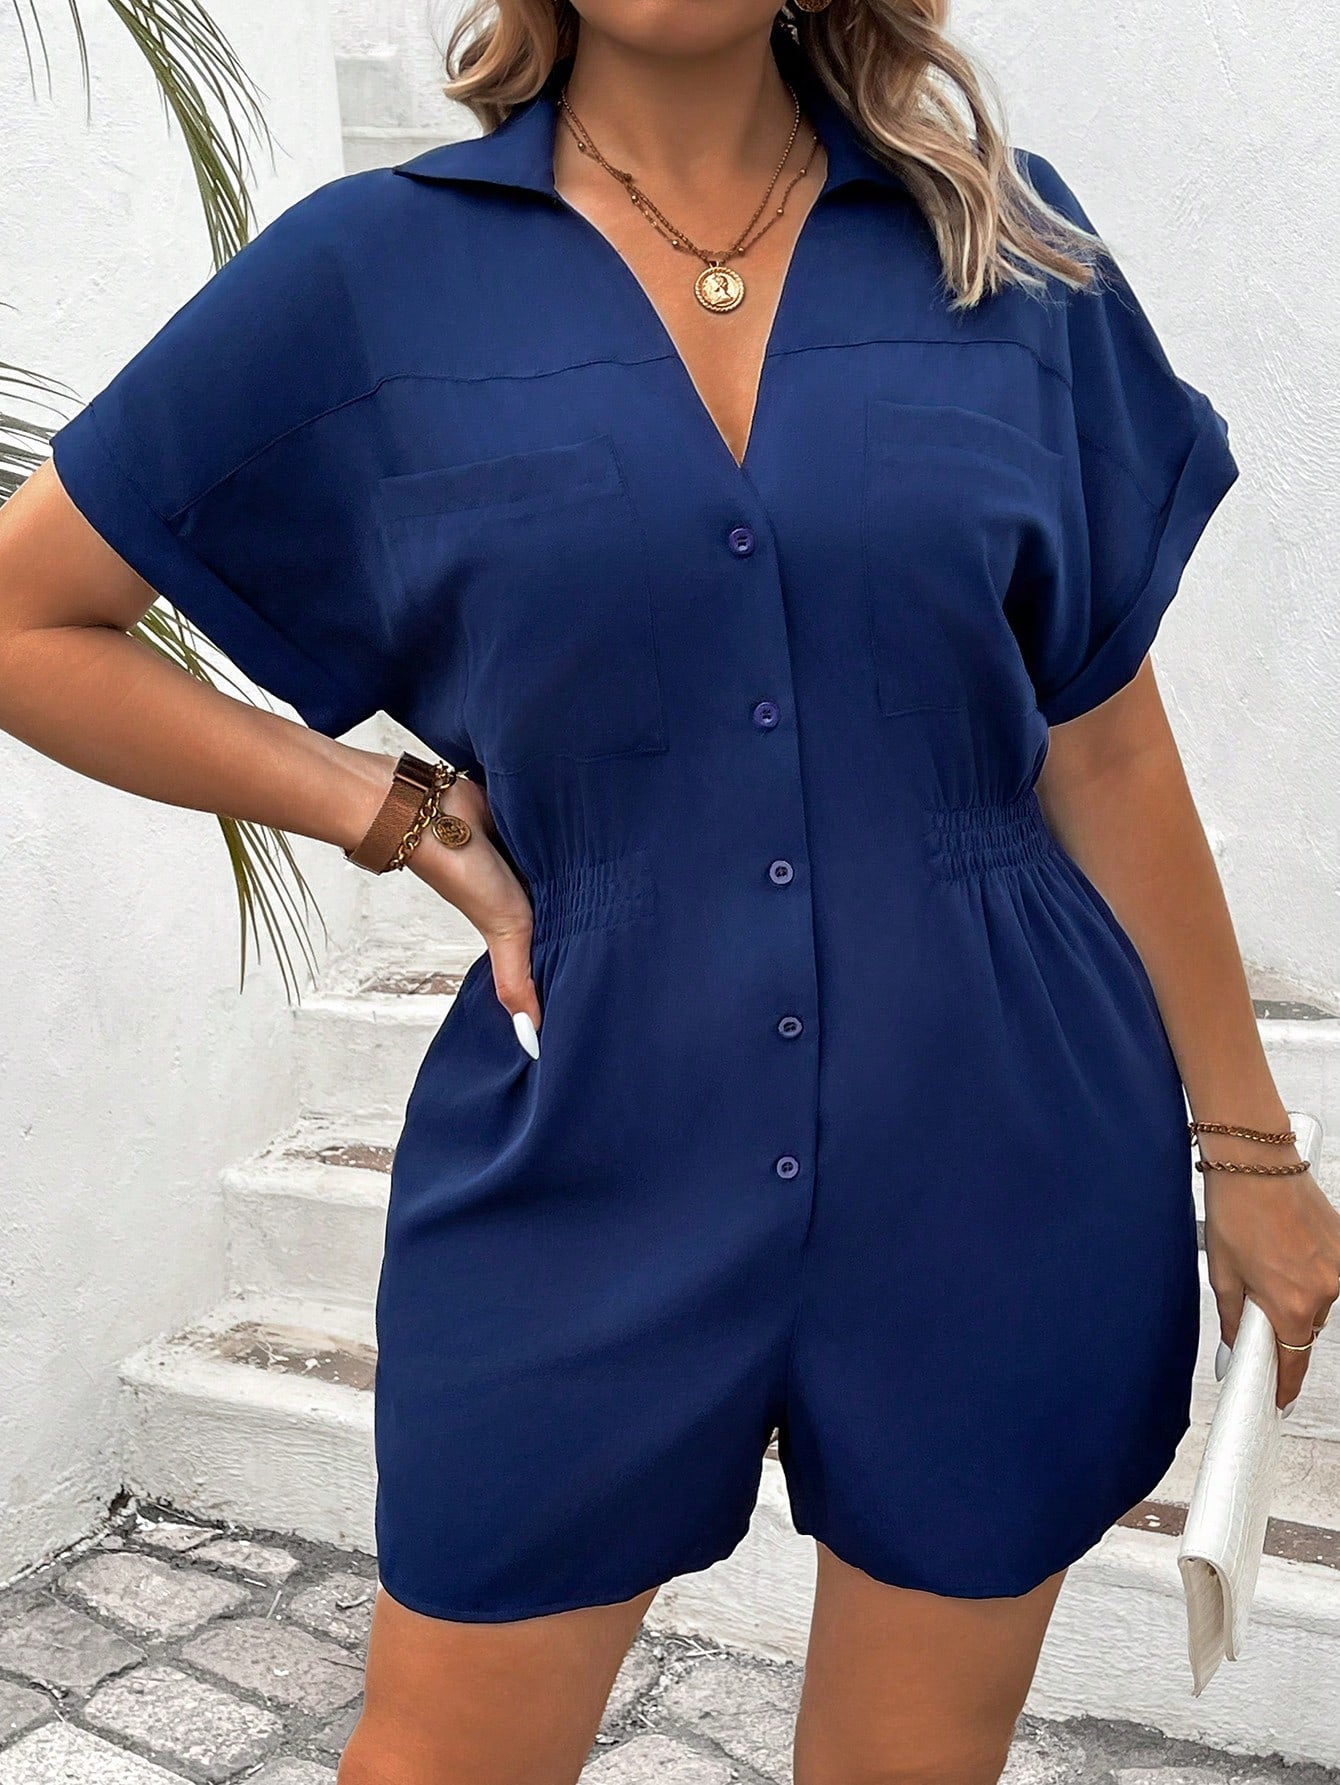 Plus Size Women's Solid Color Batwing Short Sleeve Romper With Single-Breasted Design